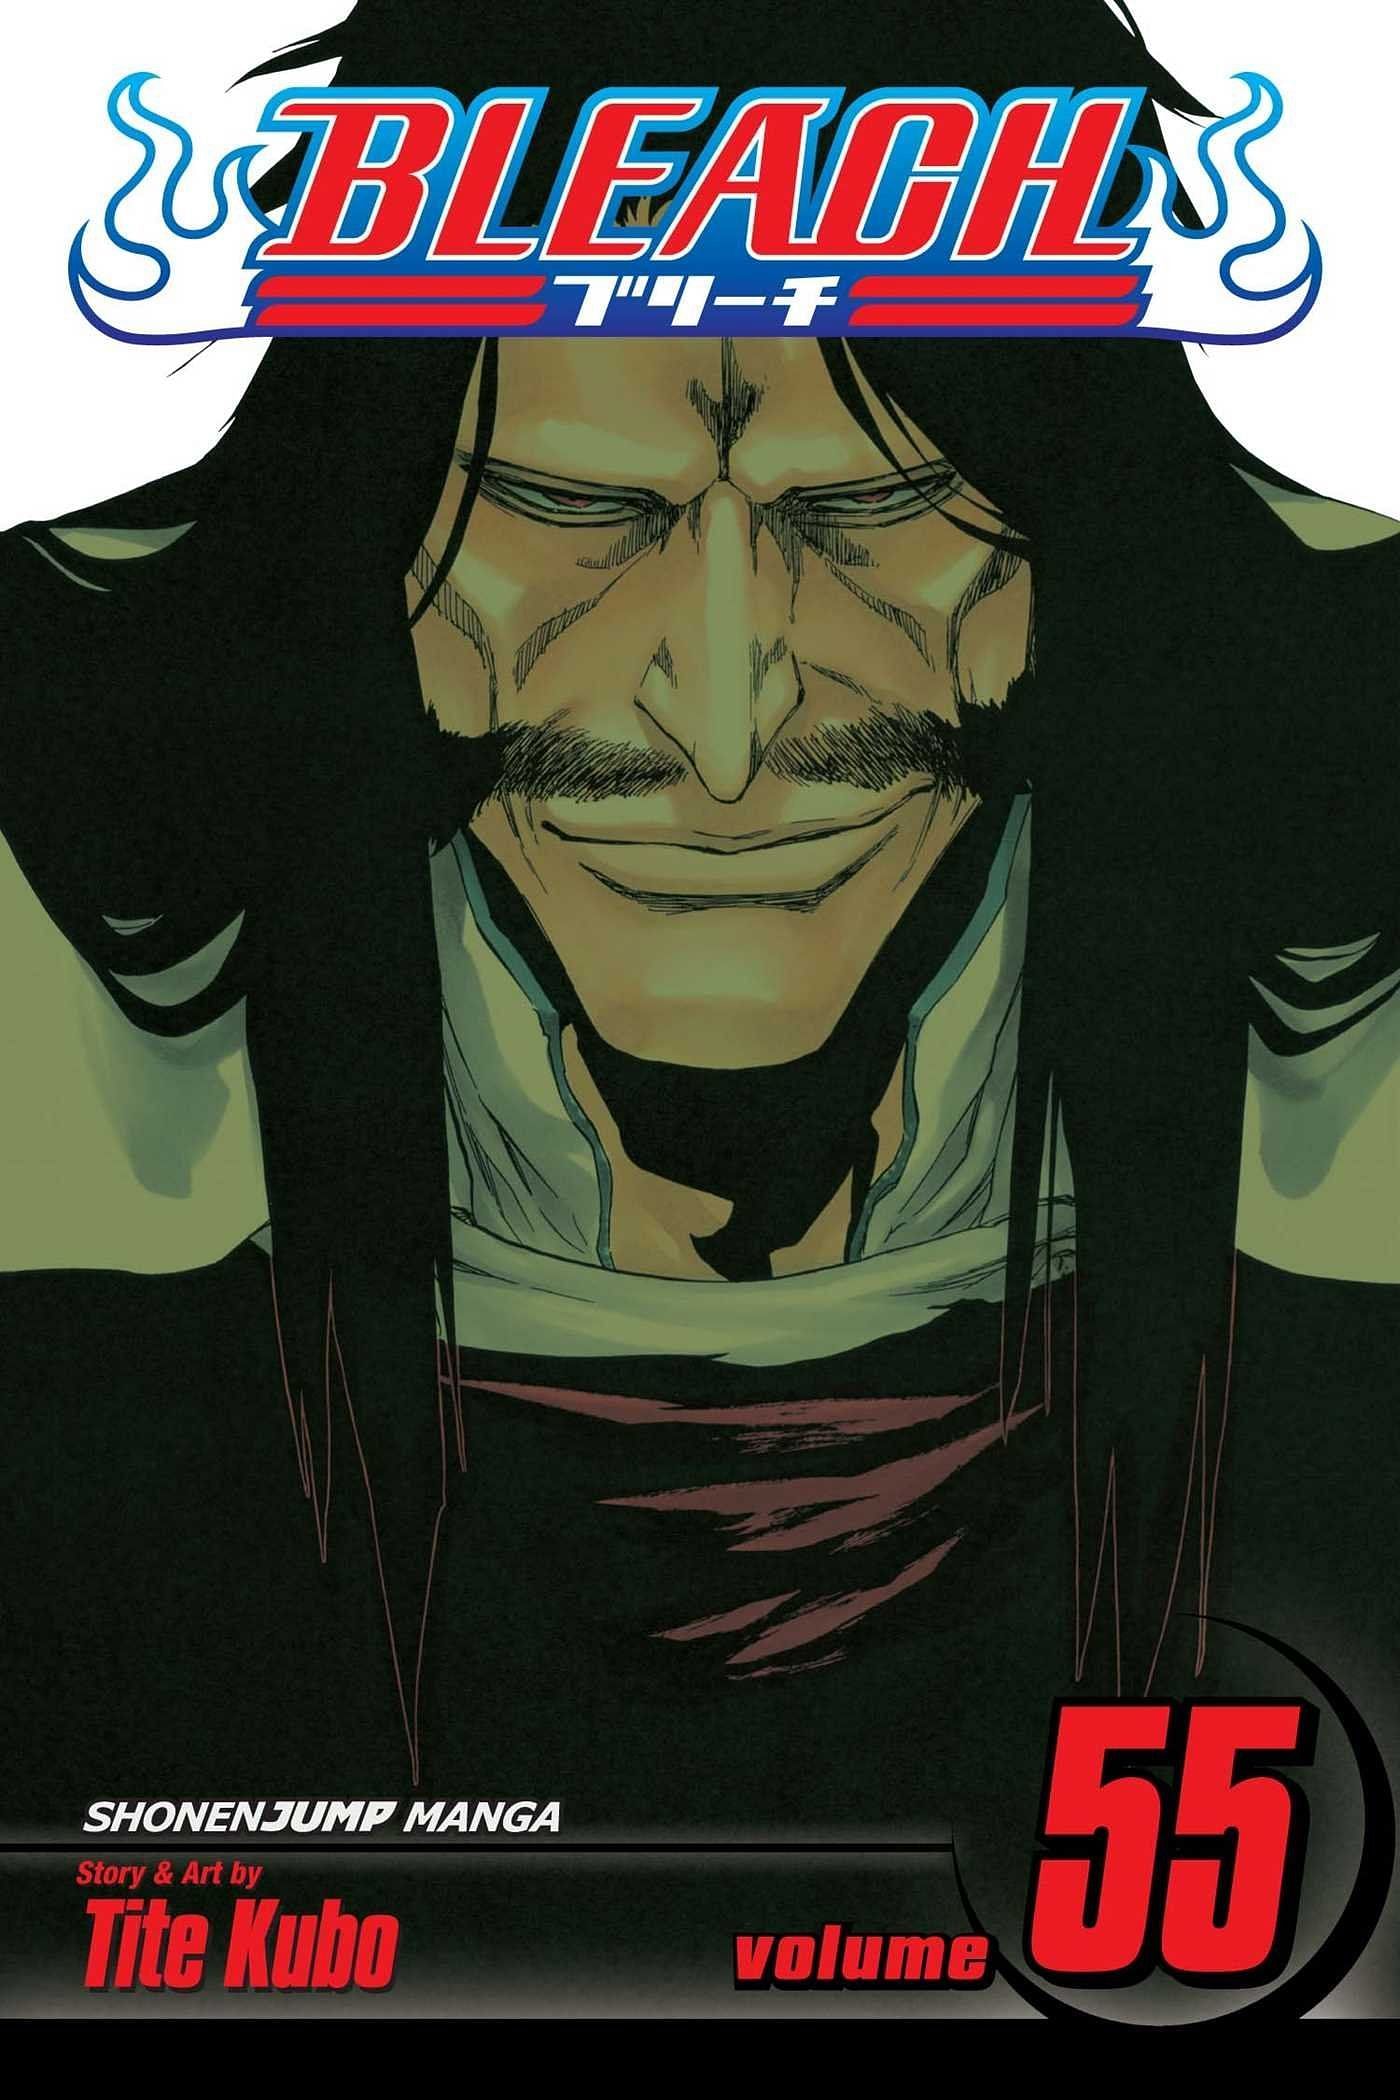 The front cover art for Volume 55 of the Bleach manga which features Yhwach, the primary antagonist of the Thousand Year Blood War arc (Image via Shueisha)